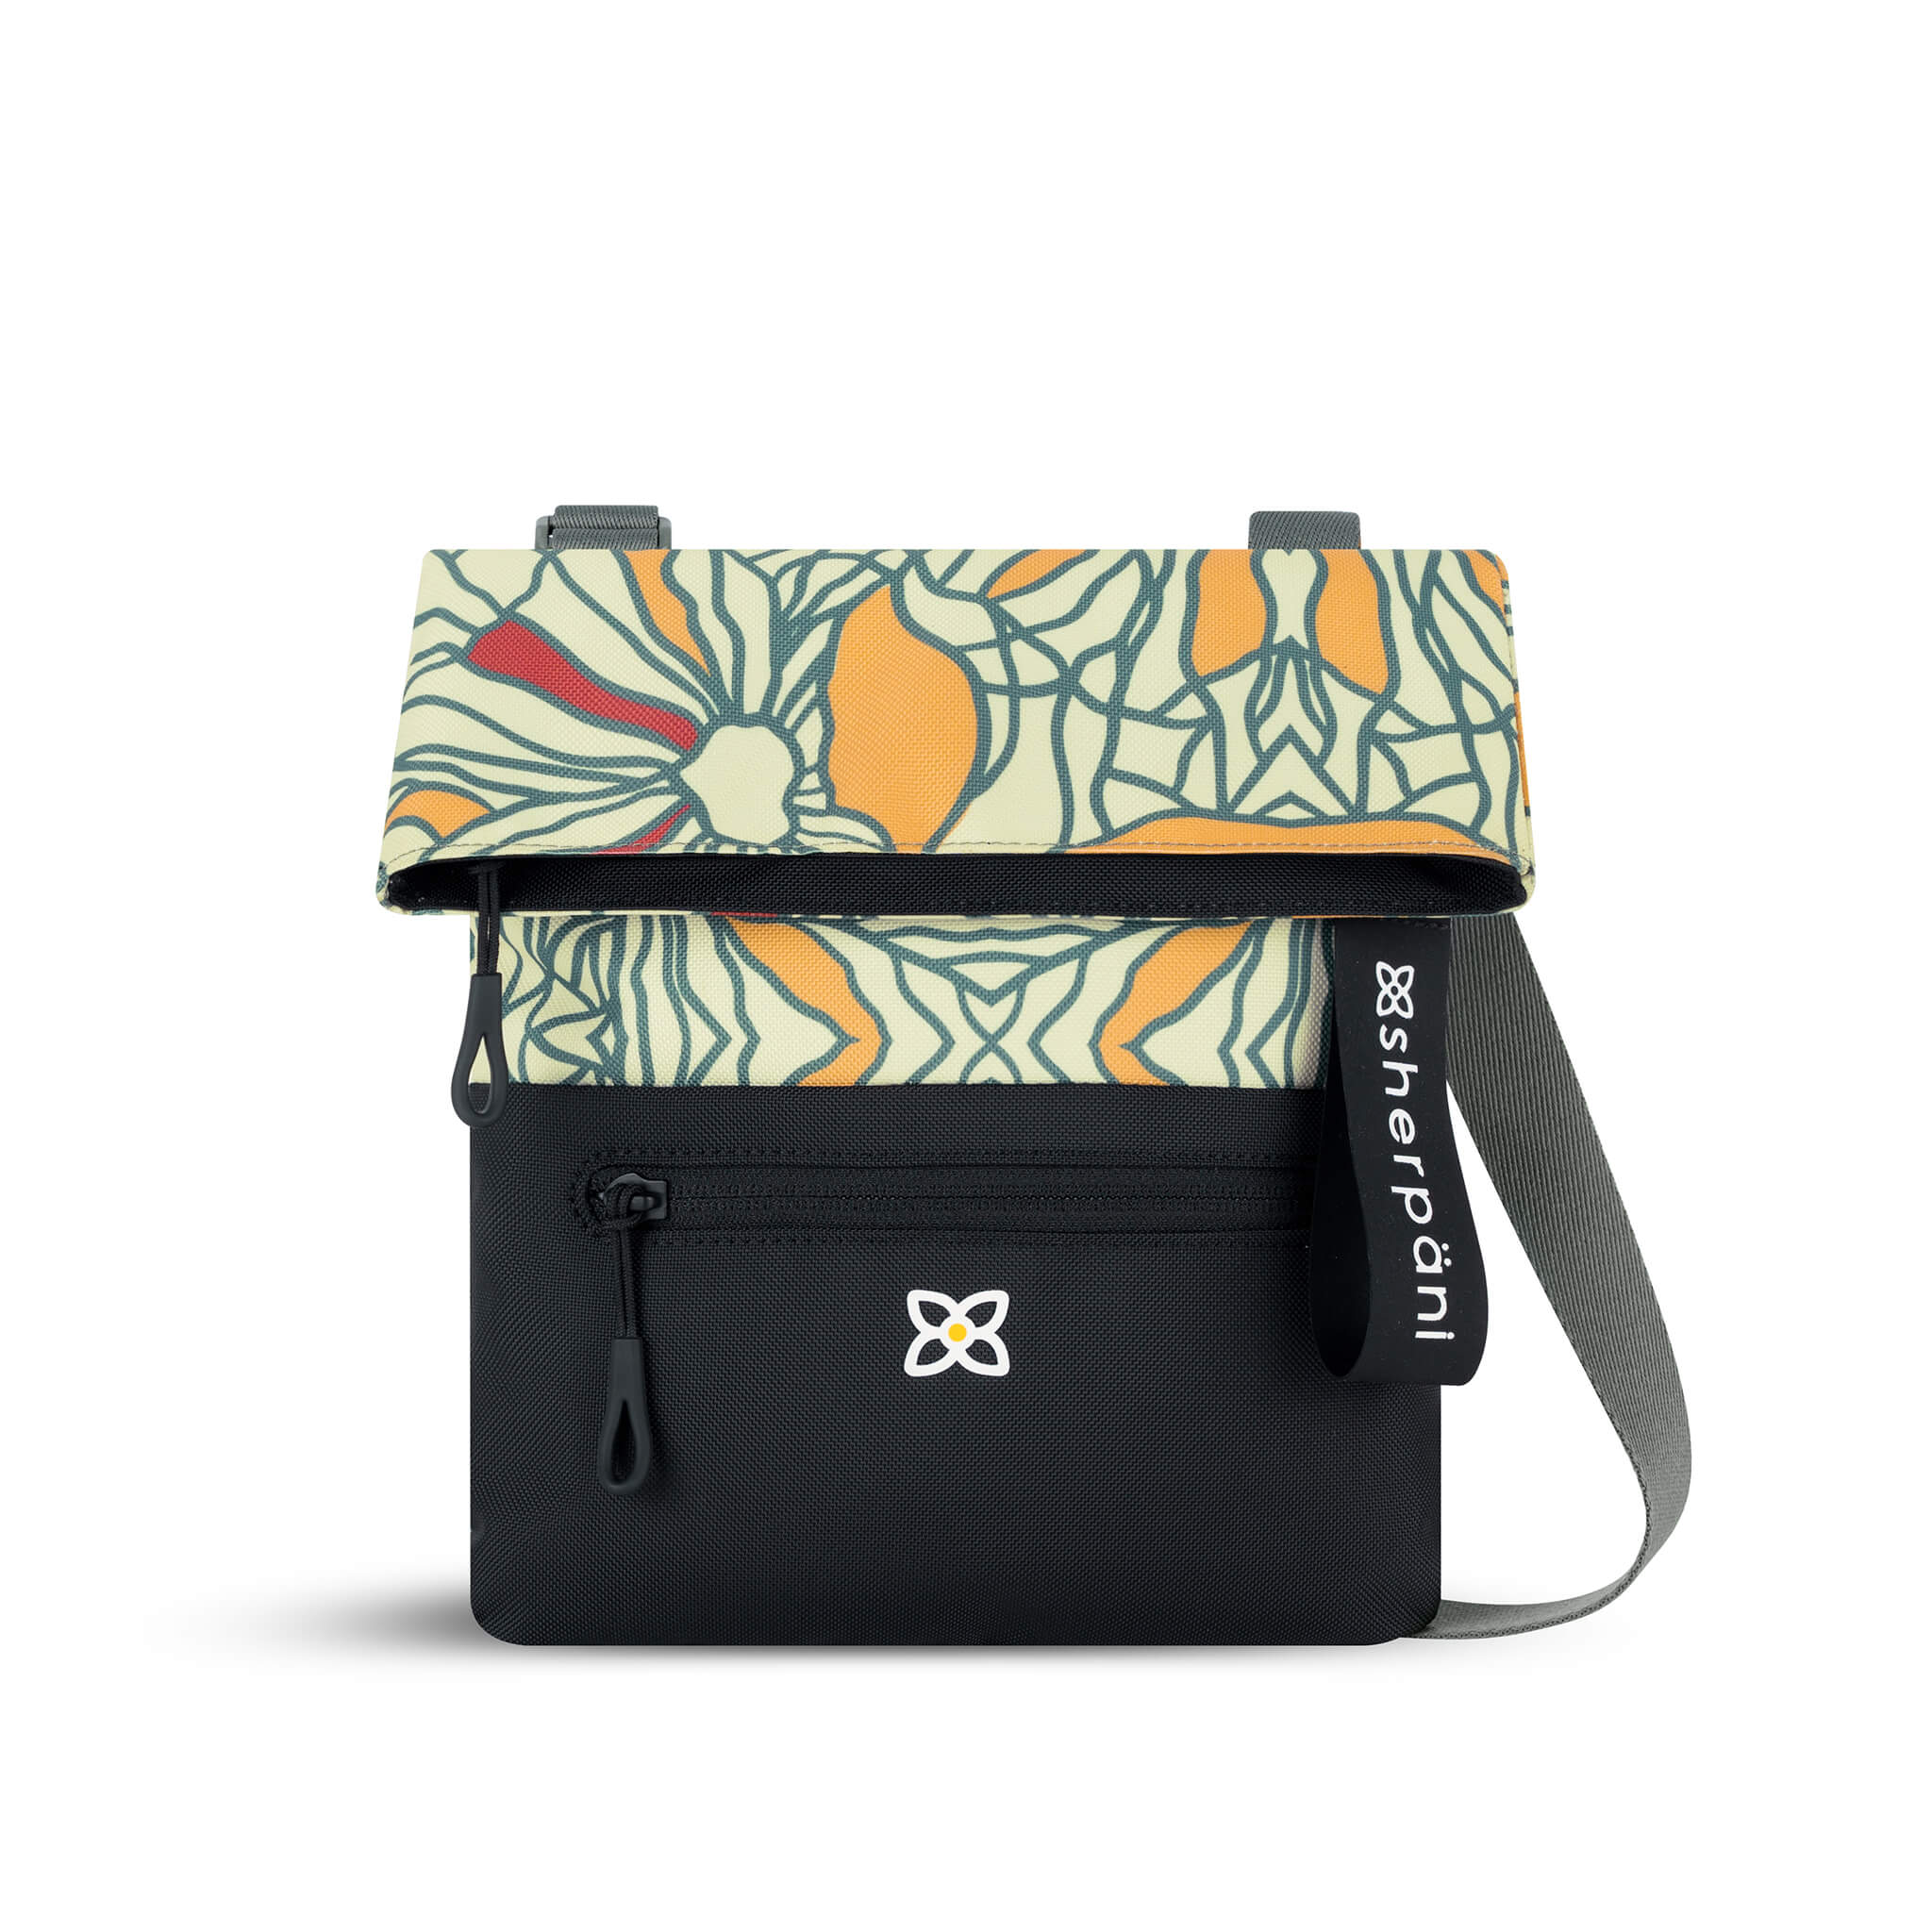 Flat front view of Sherpani fold over crossbody bag, the Pica in Fiori. Pica features include an adjustable crossbody strap, outside zipper pocket, back flap pocket, inside zipper pocket and slip pocket, detachable keychain and RFID protection. The Fiori colorway is two-toned in black and a floral pattern with red accents. 